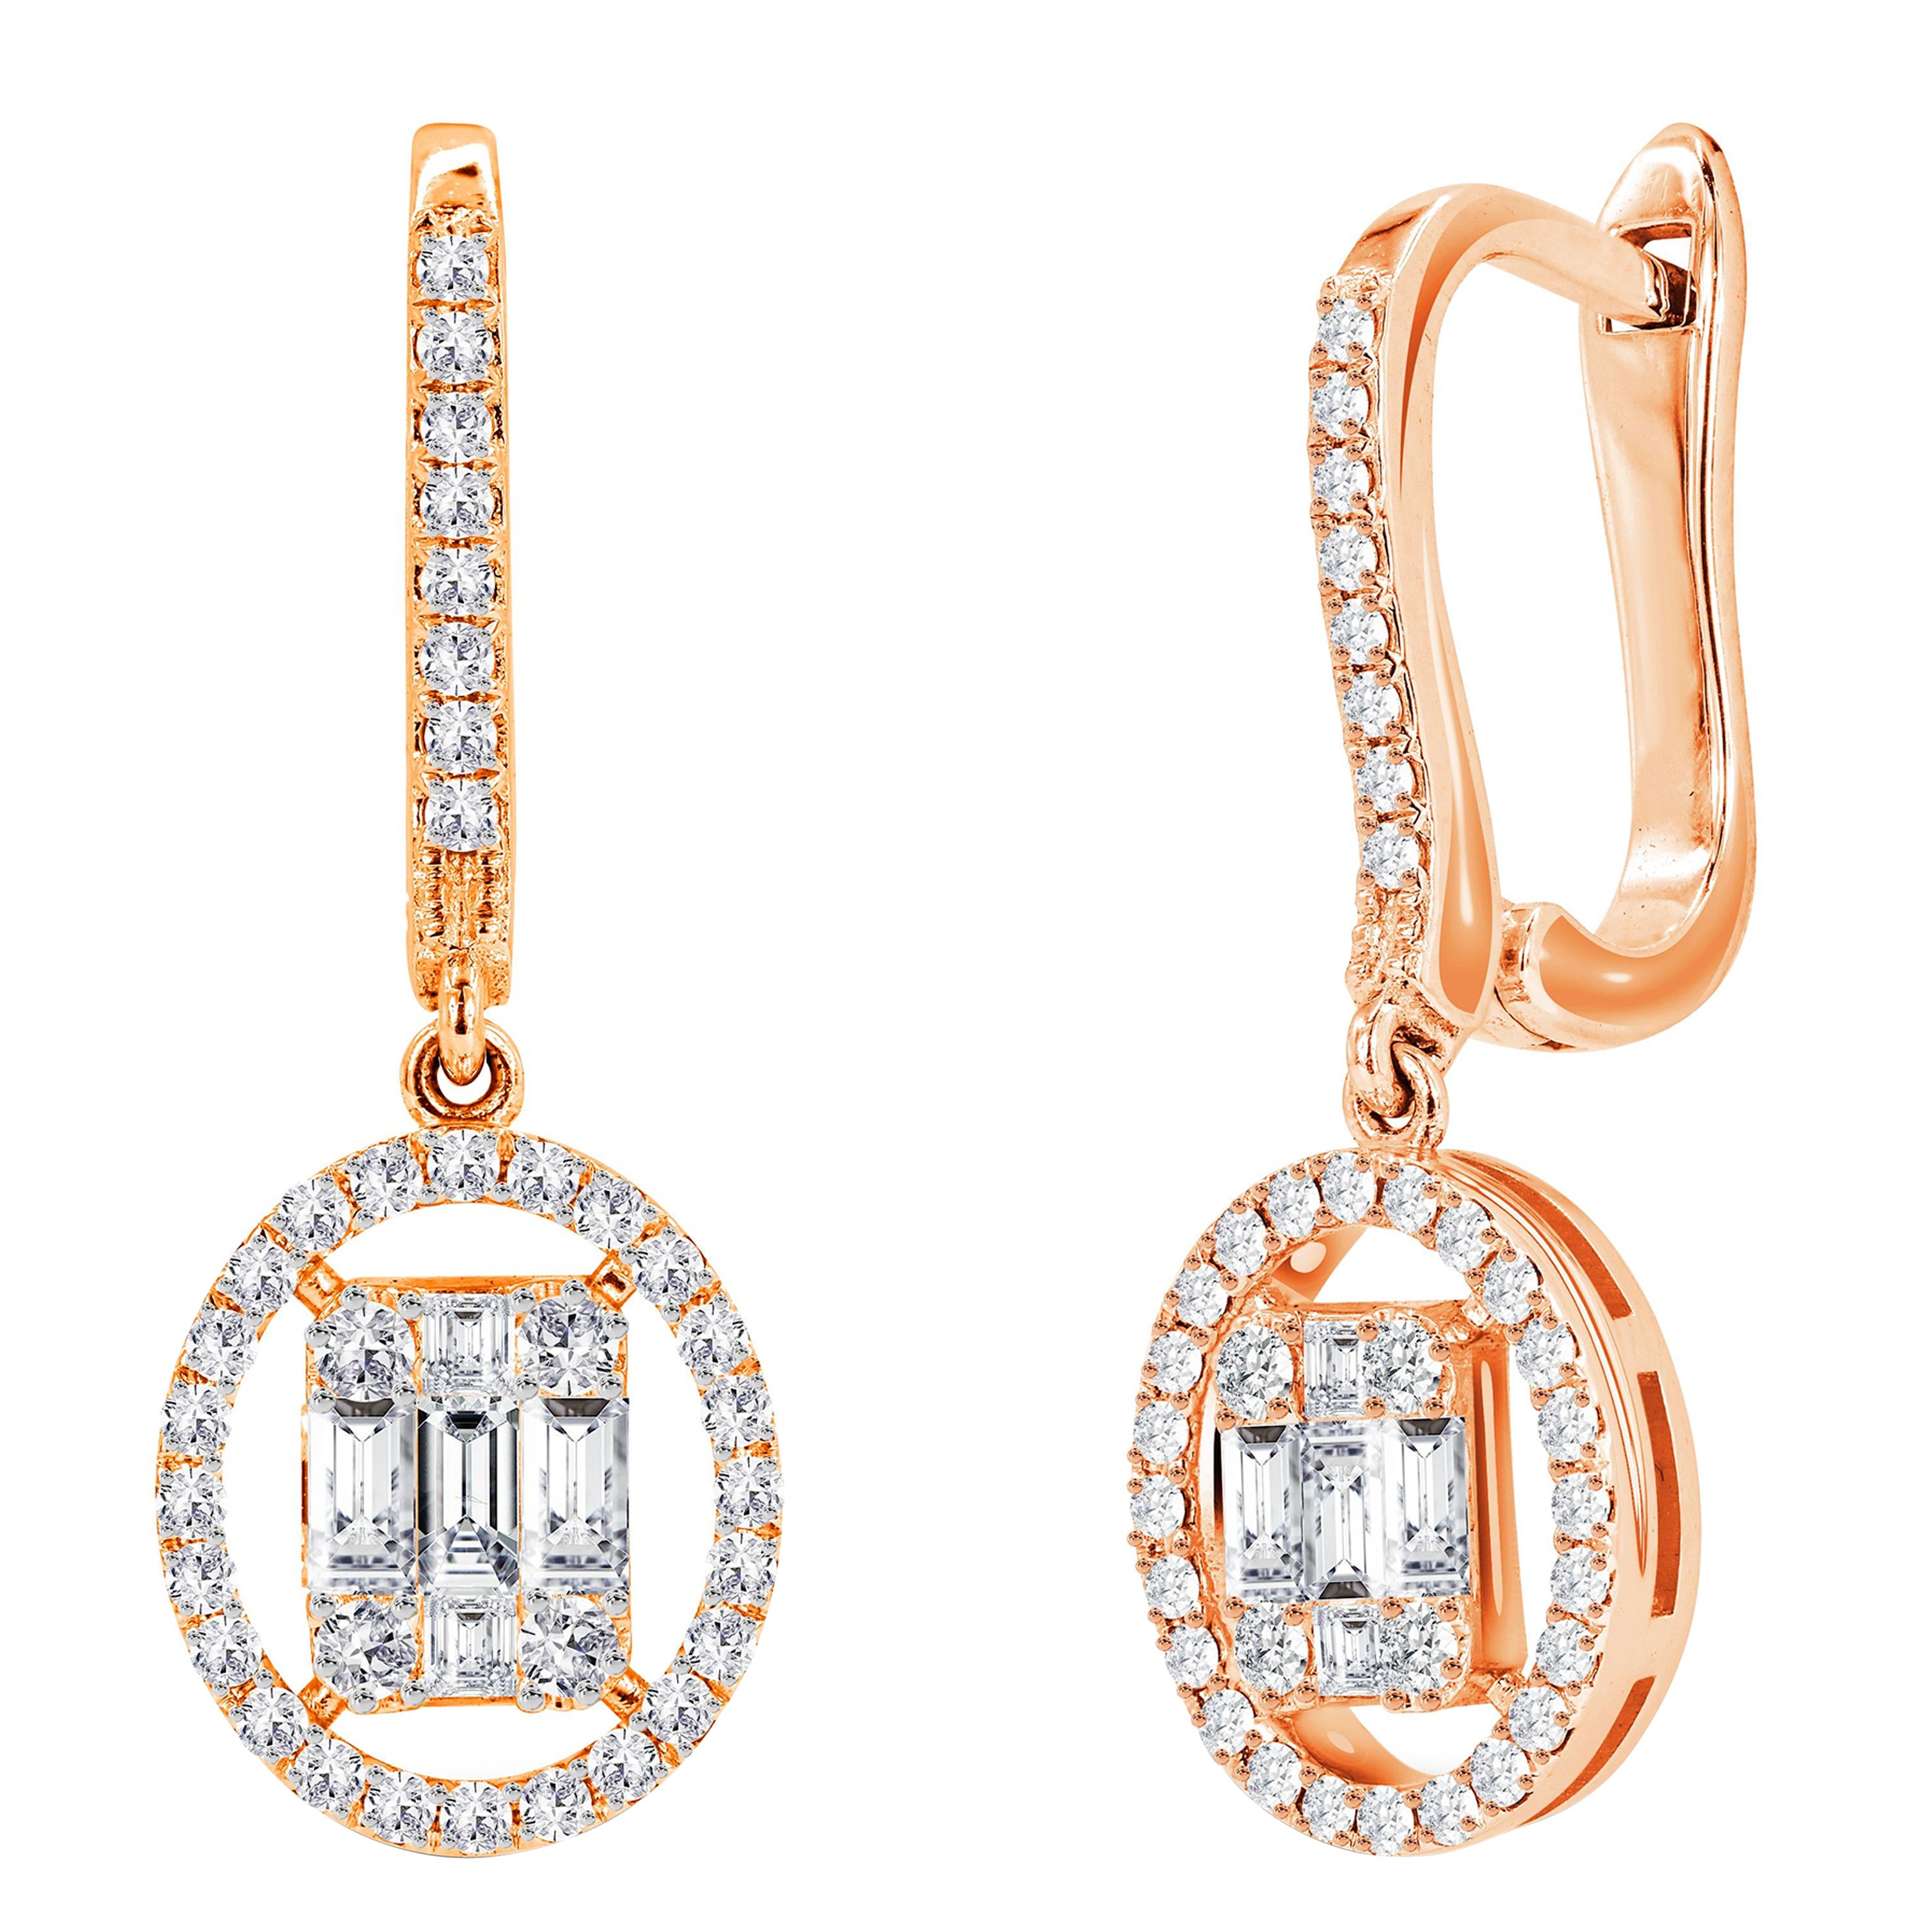 1.19ct Diamond Baguette and Round Cut Diamond Lever-Back Earrings in 14k Gold For Sale